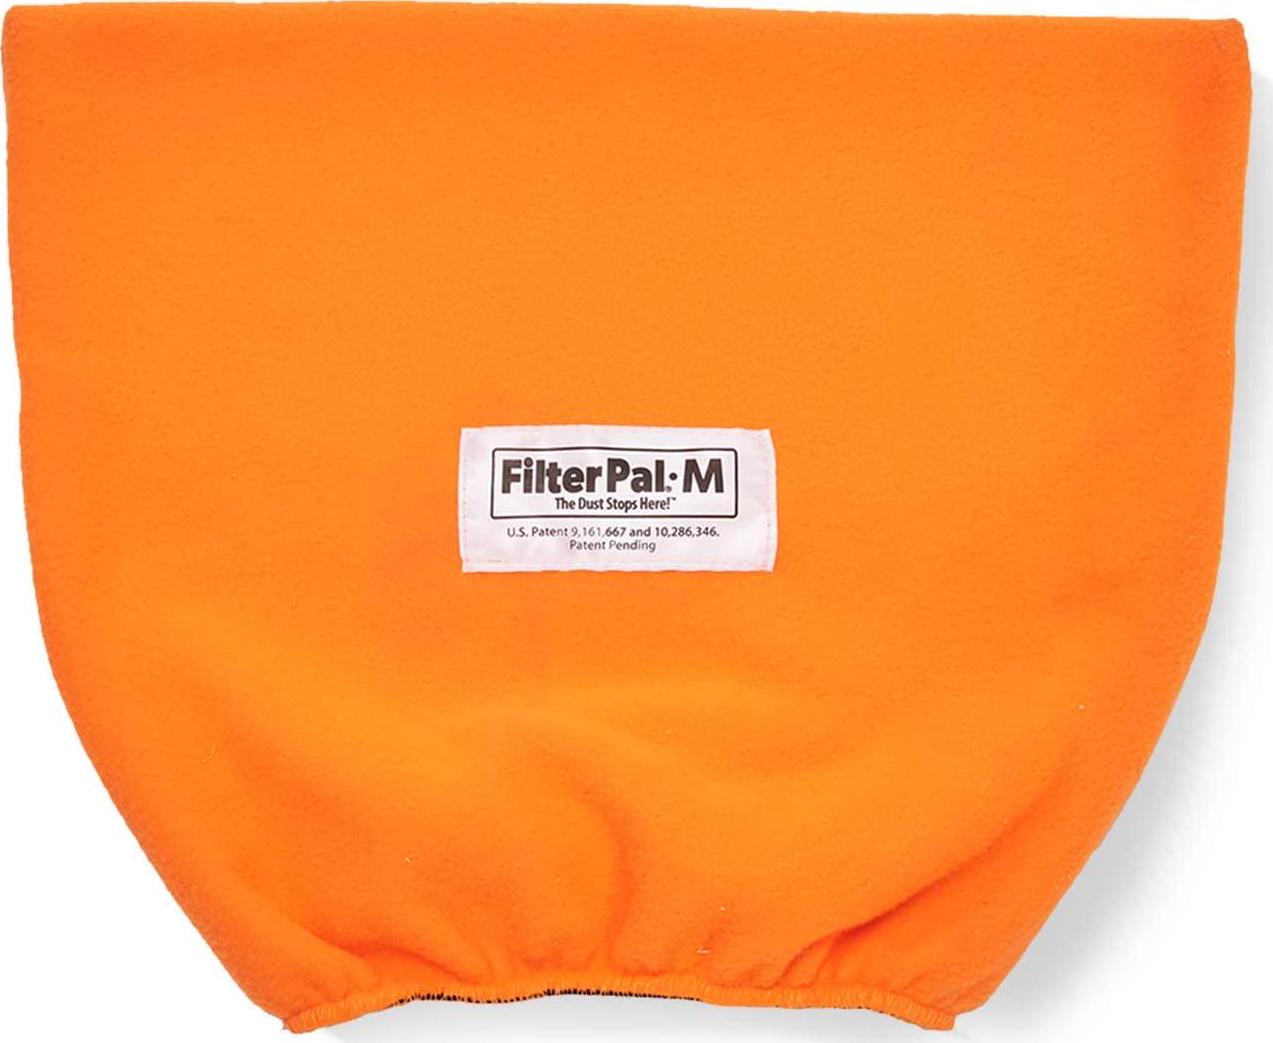 Filterpal, FilterPal FP1 - Medium Reusable Prefilter For Shop Vacuum - Cloth Filter Cover and Dust Collector Bag - Wet/Dry Vac OEM Filter Saver - Washable - Environmentally Friendly - Assembled in the USA